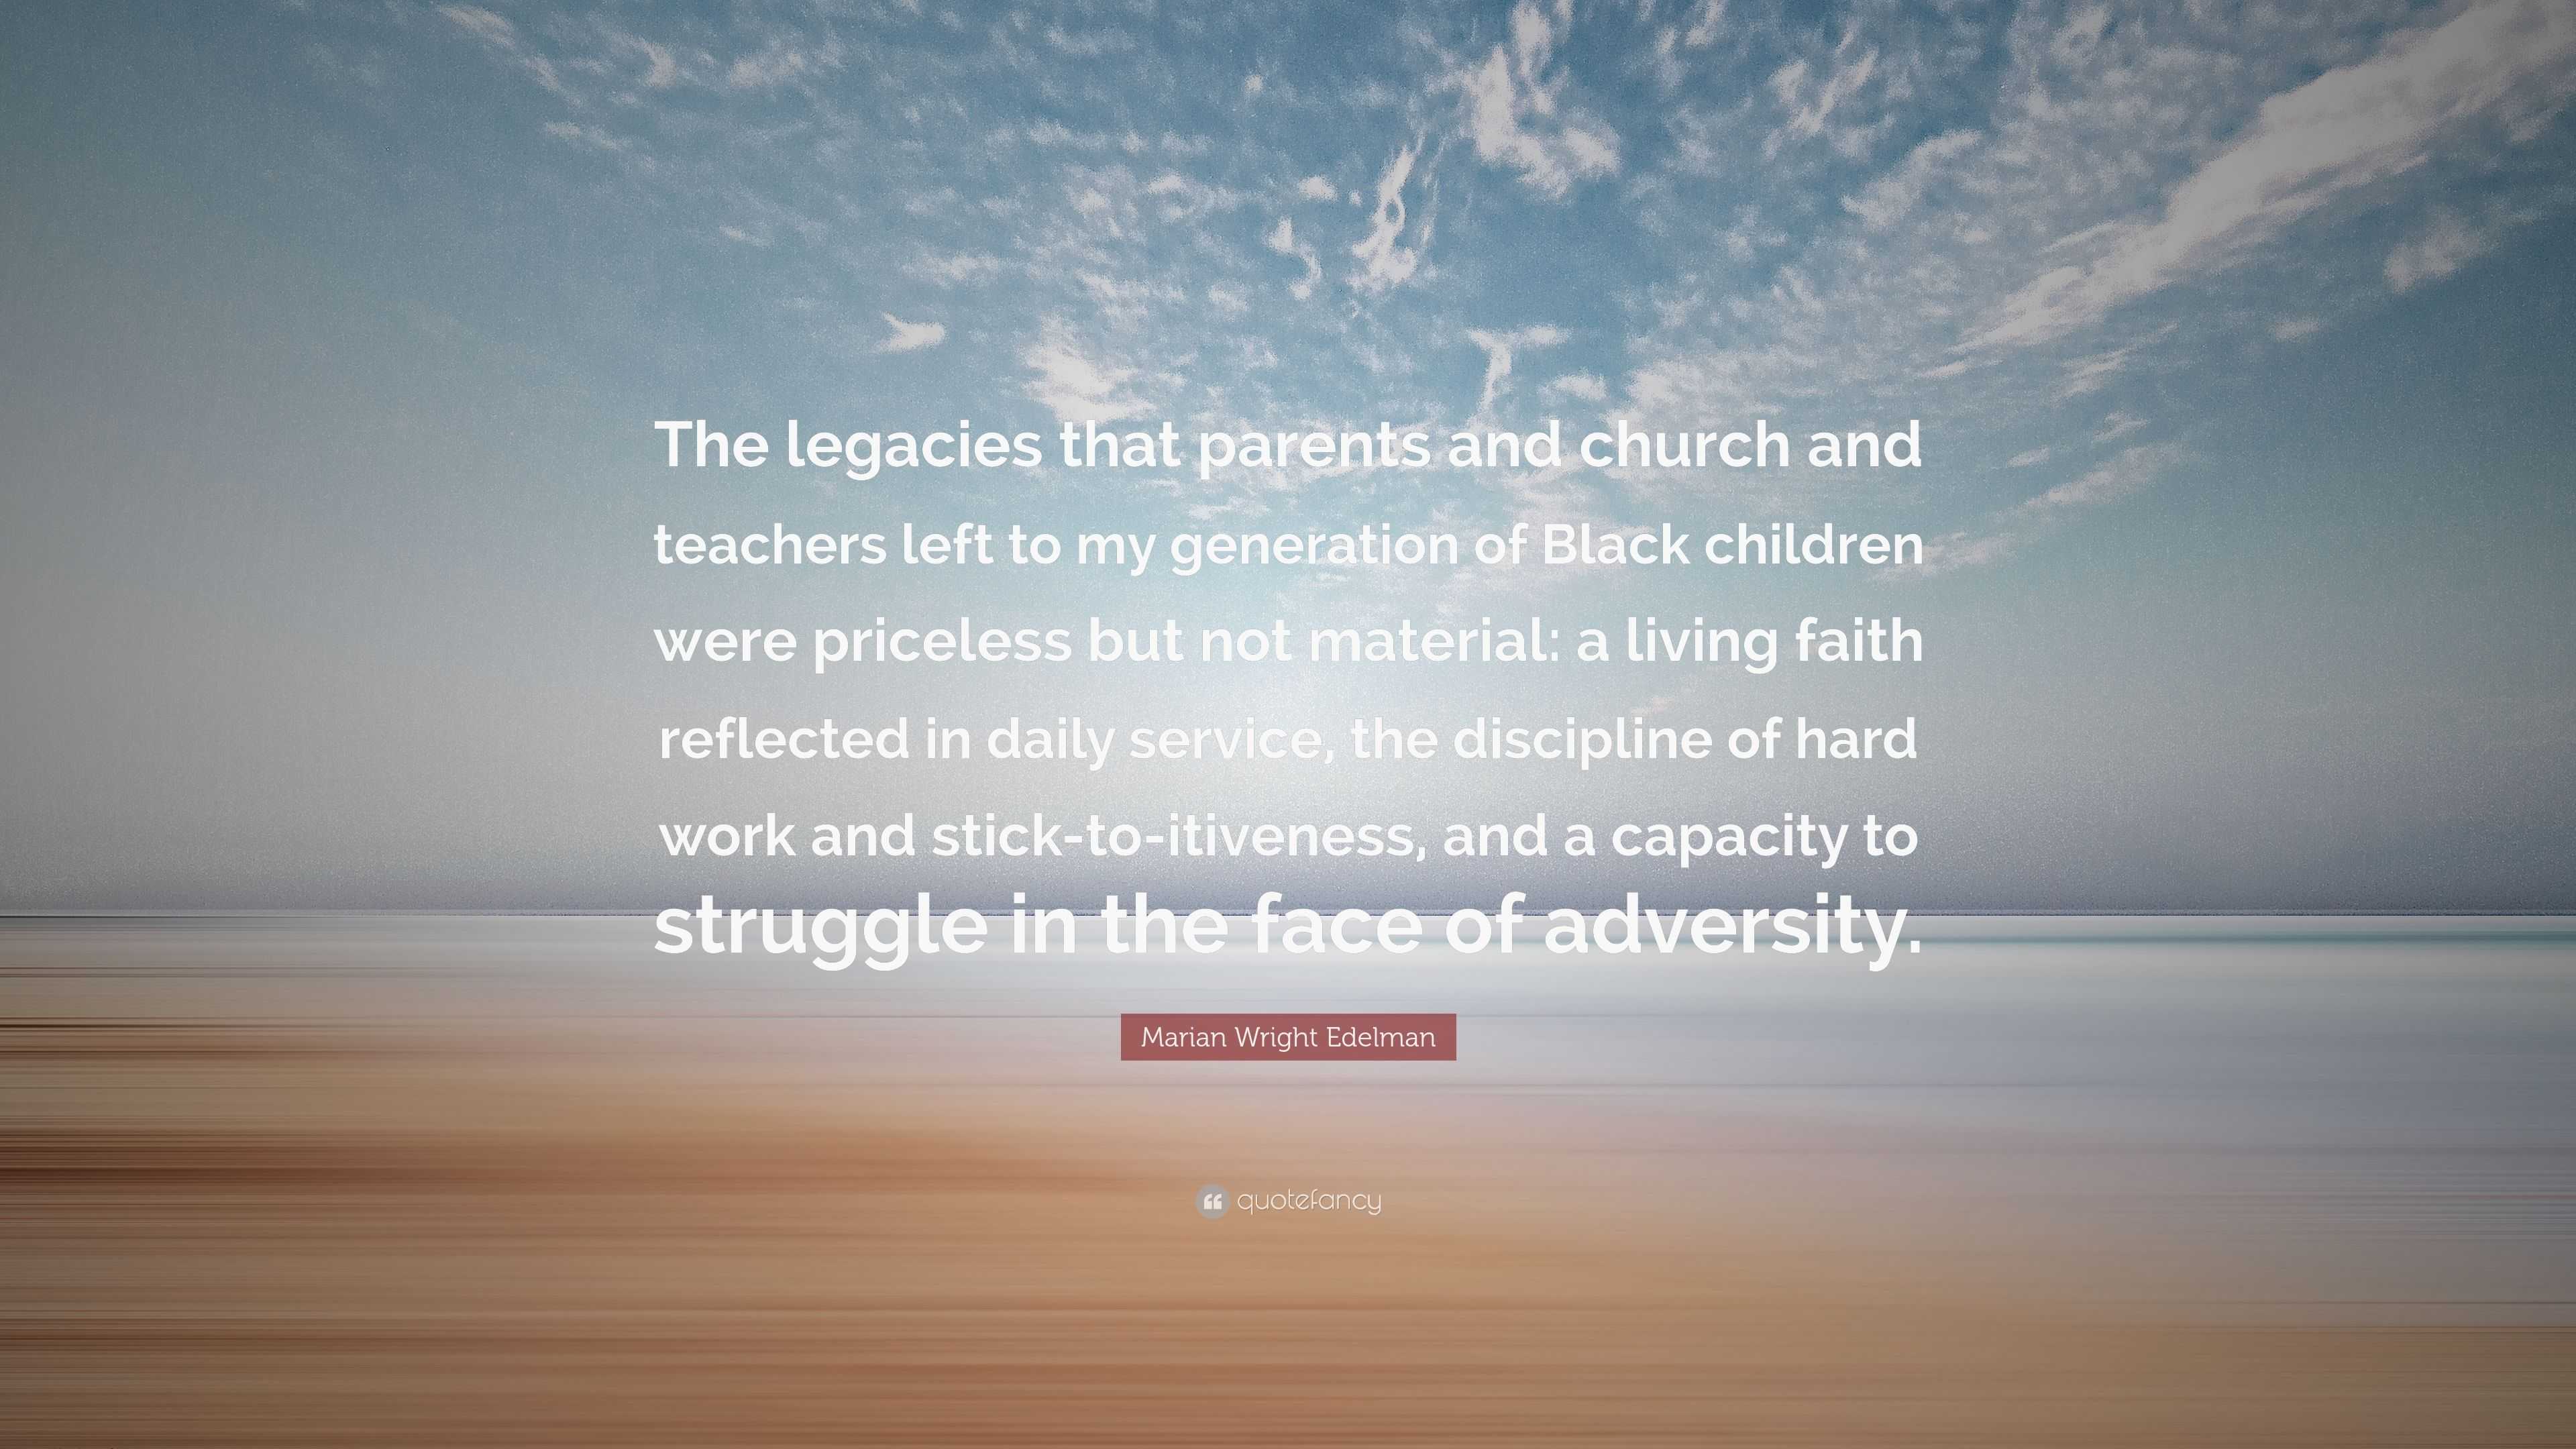 Marian Wright Edelman Quote: “The legacies that parents and church and ...